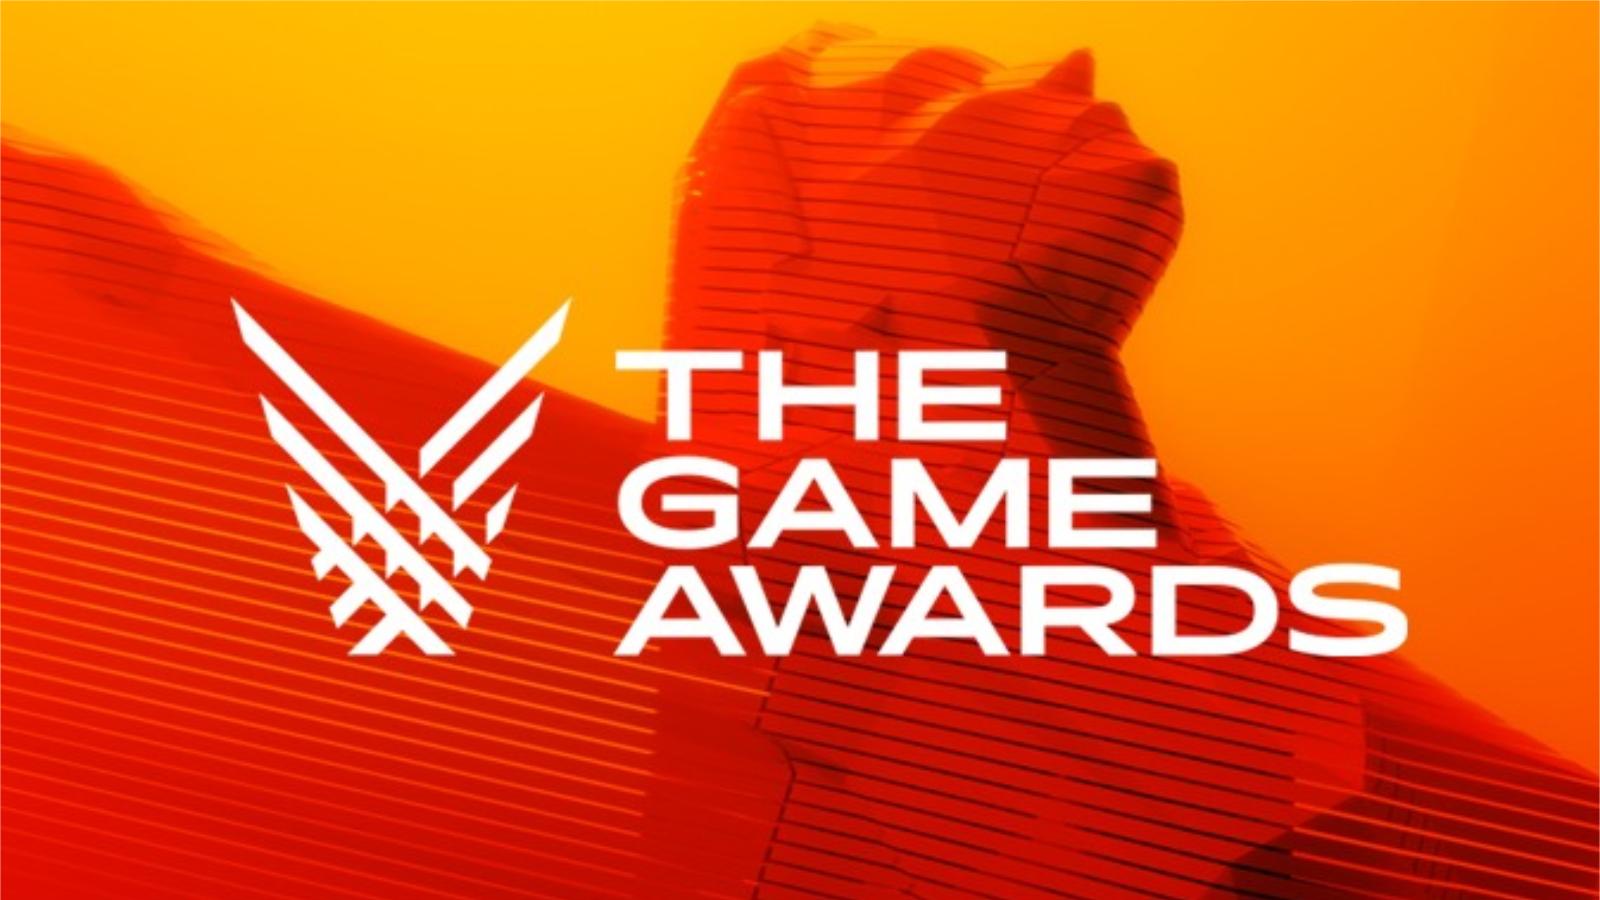 Bayonetta 2 Is Nominated For Game Of The Year At The Game Awards